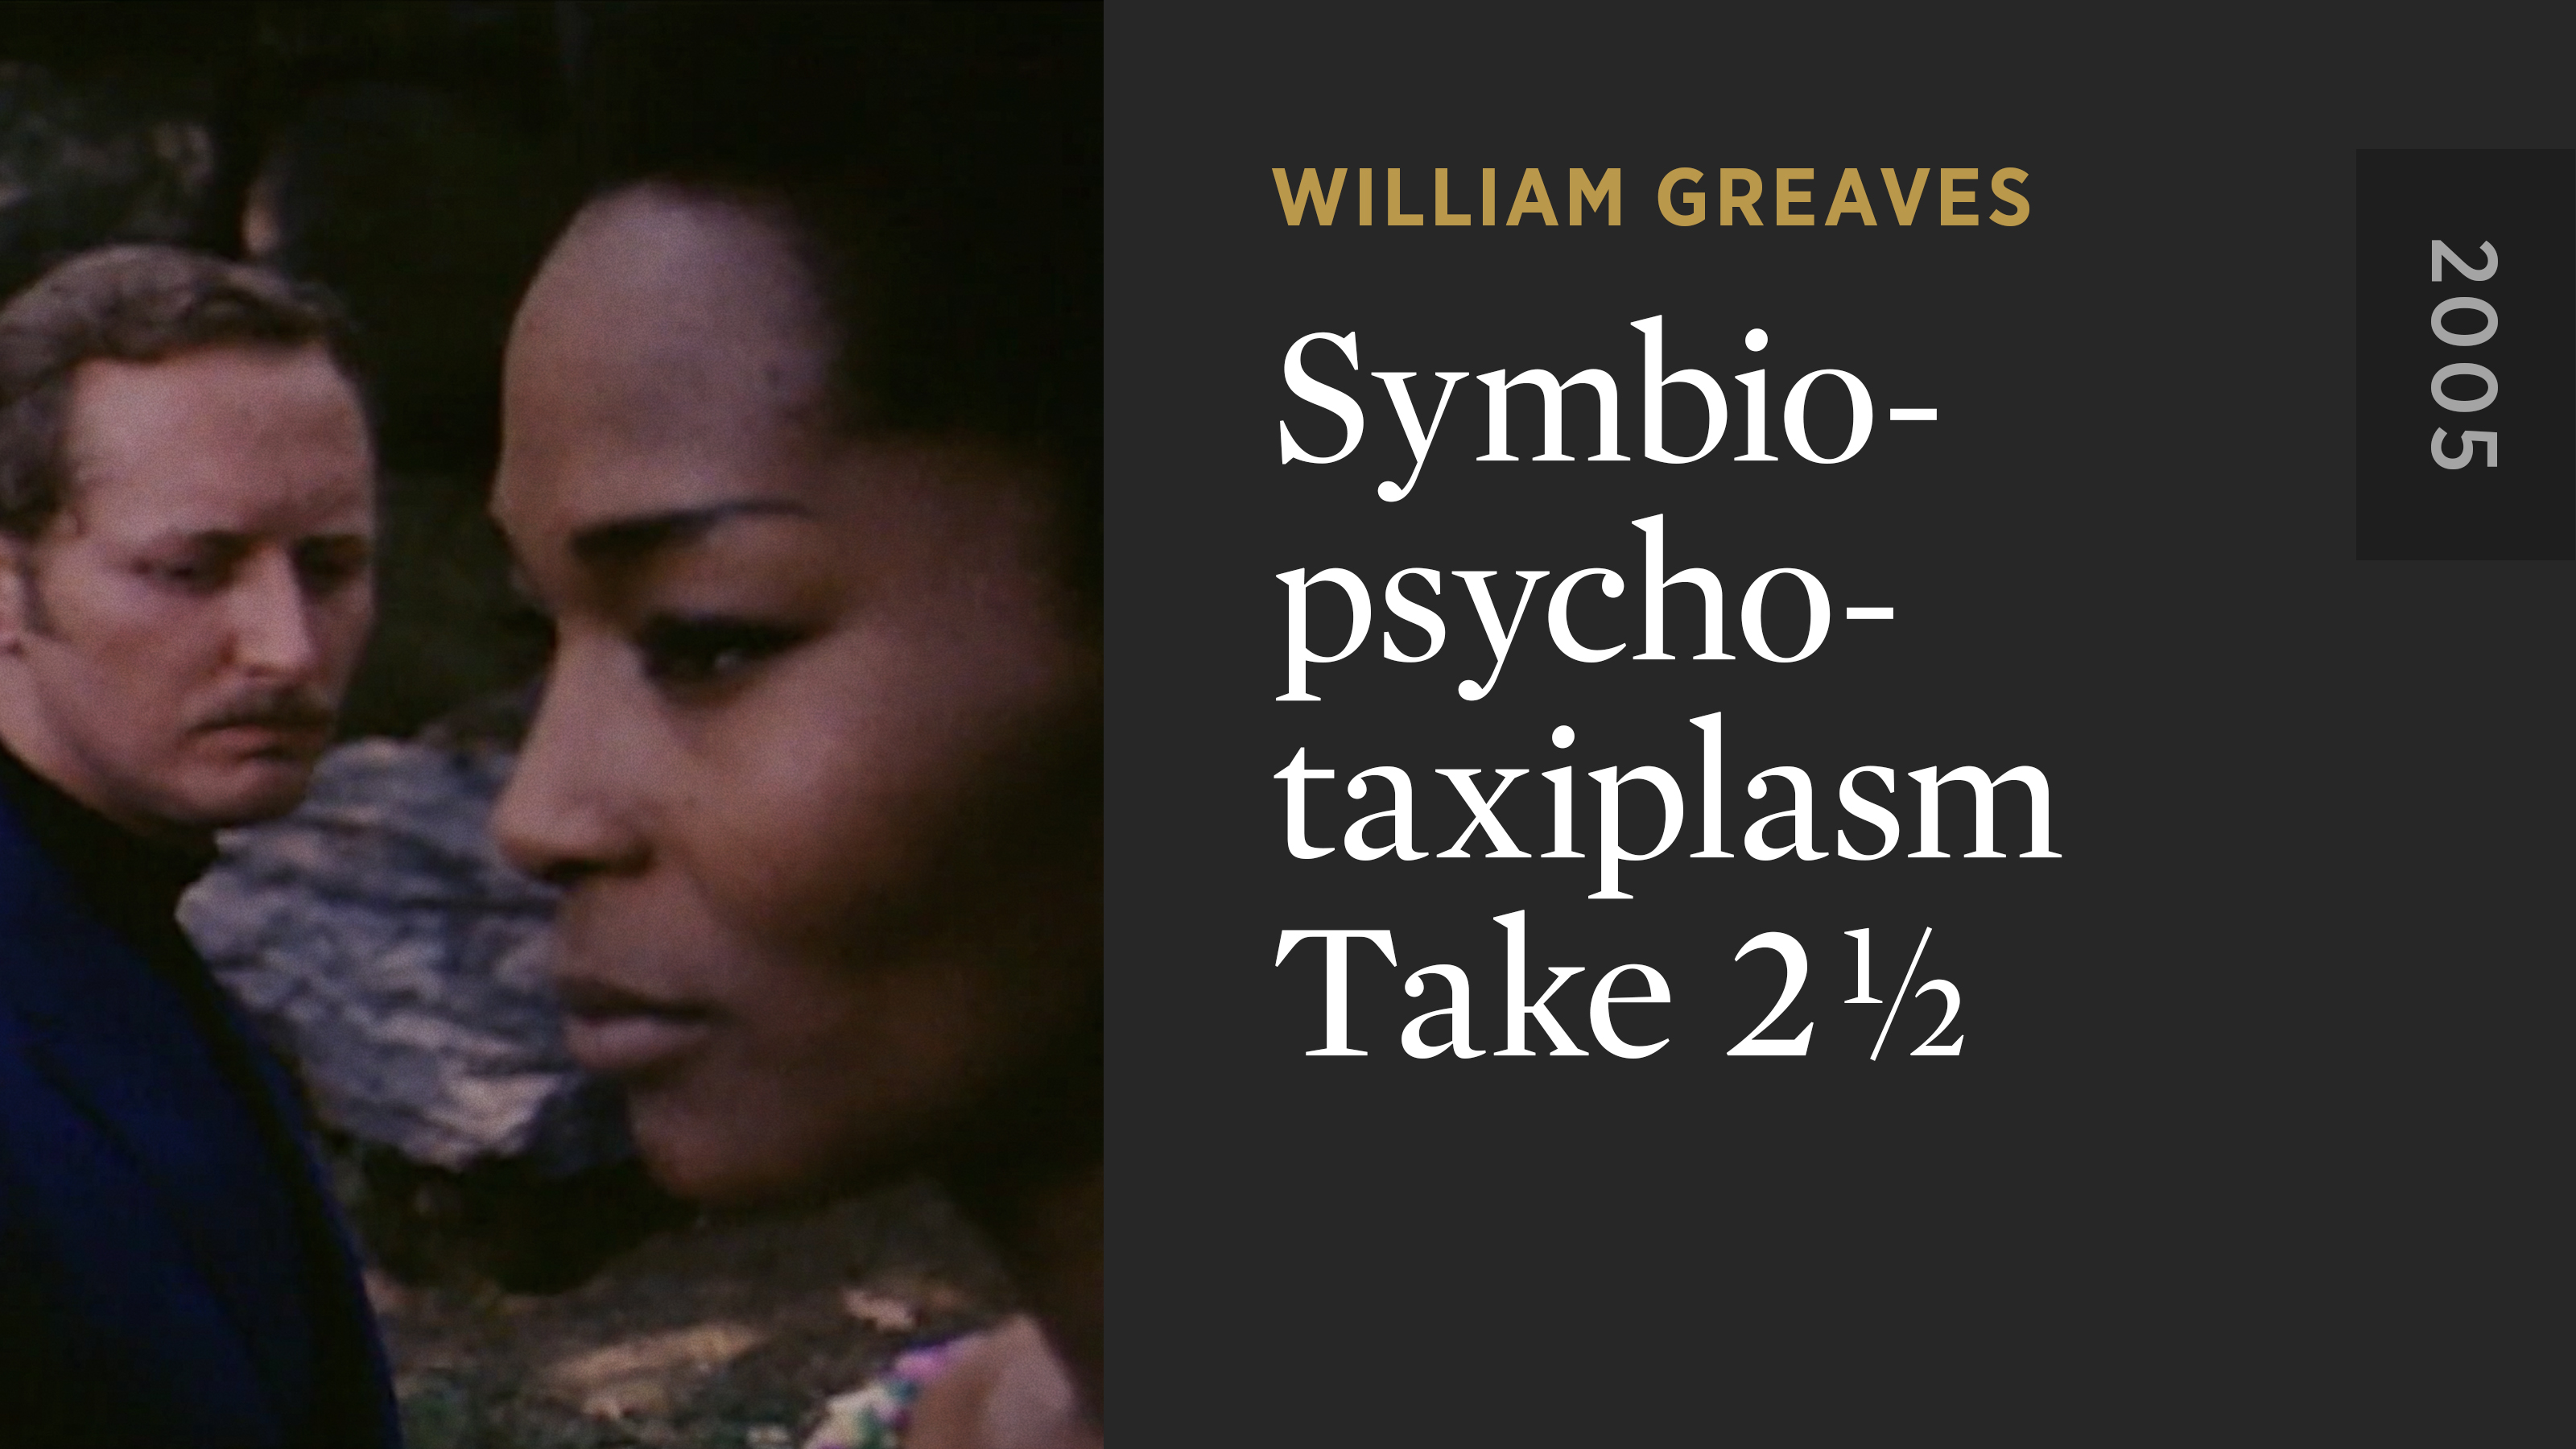 Symbiopsychotaxiplasm: Two Takes by William Greaves - The Criterion Channel